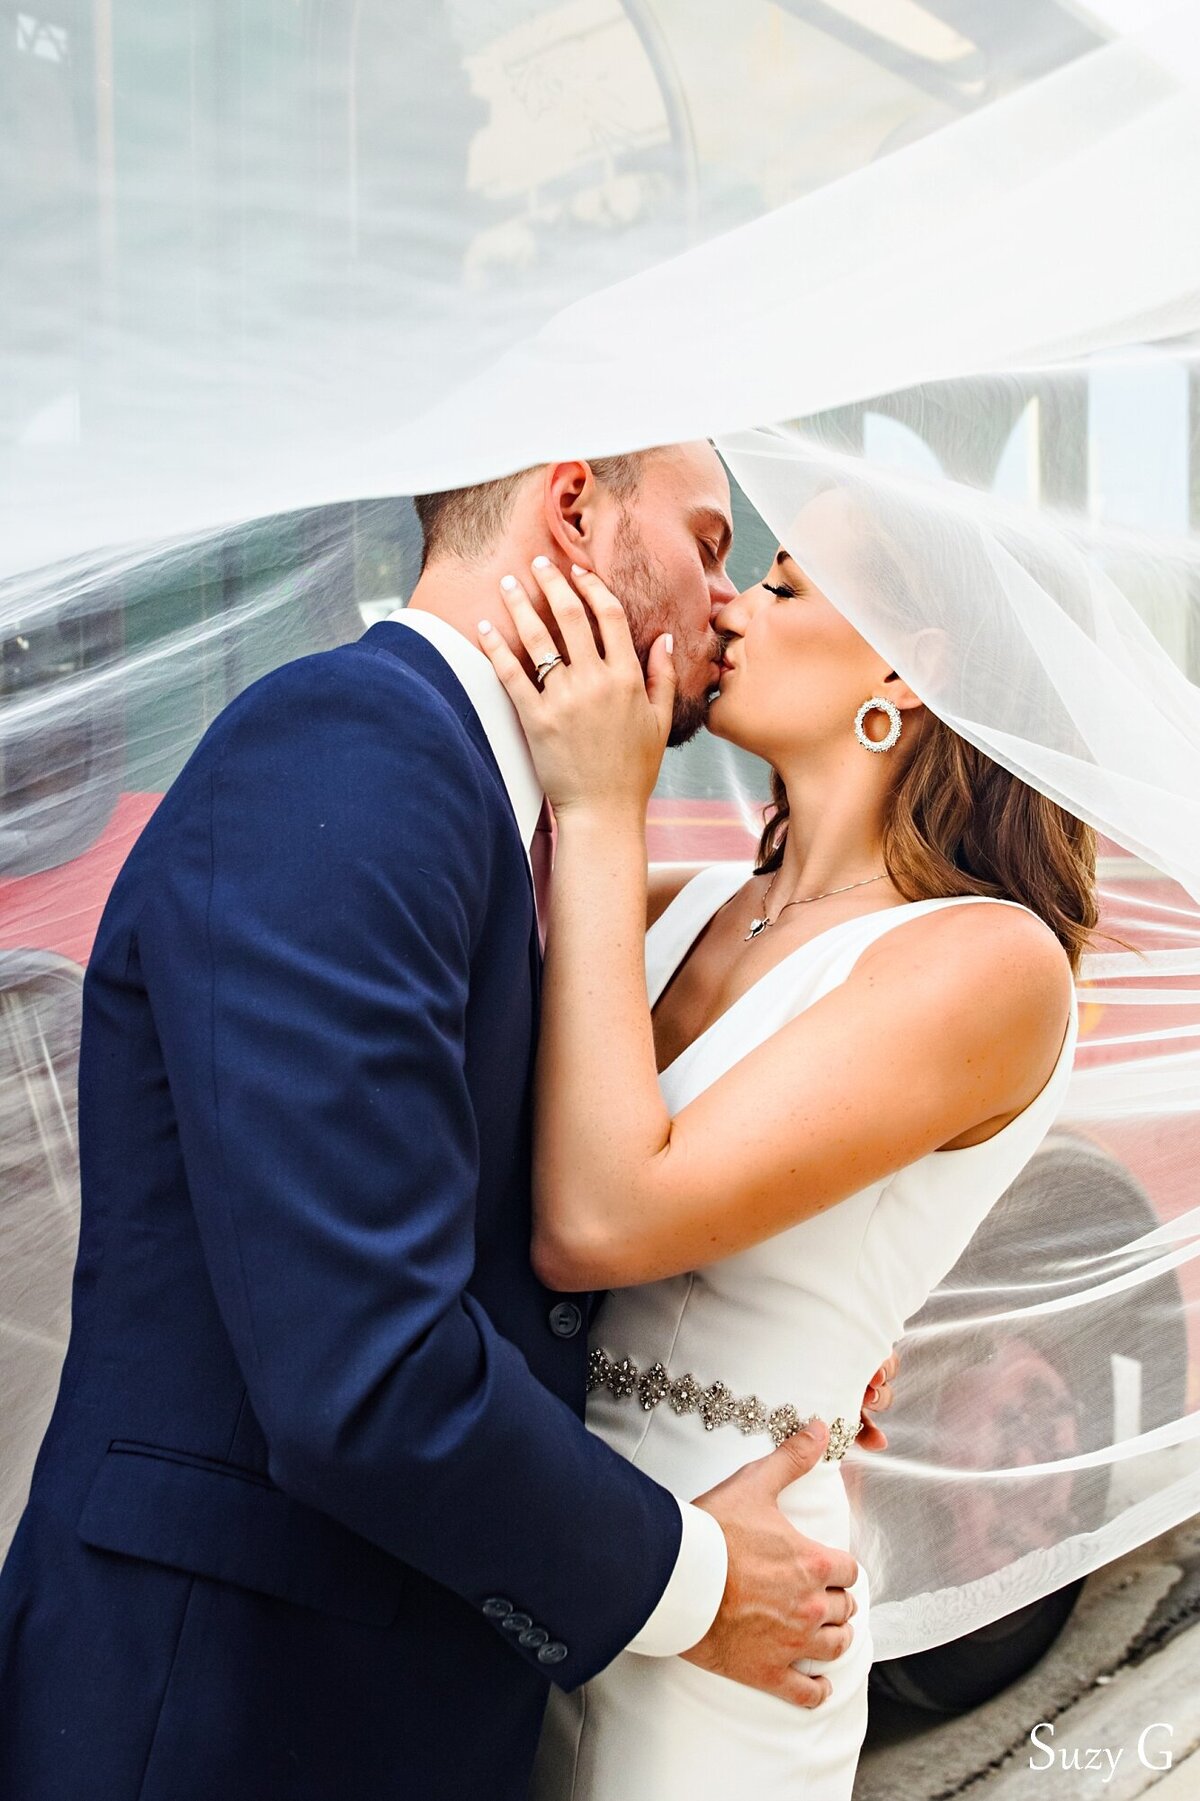 This gorgeous under the veil shot captures the sweet intimate moment of a kiss between the bride and groom.